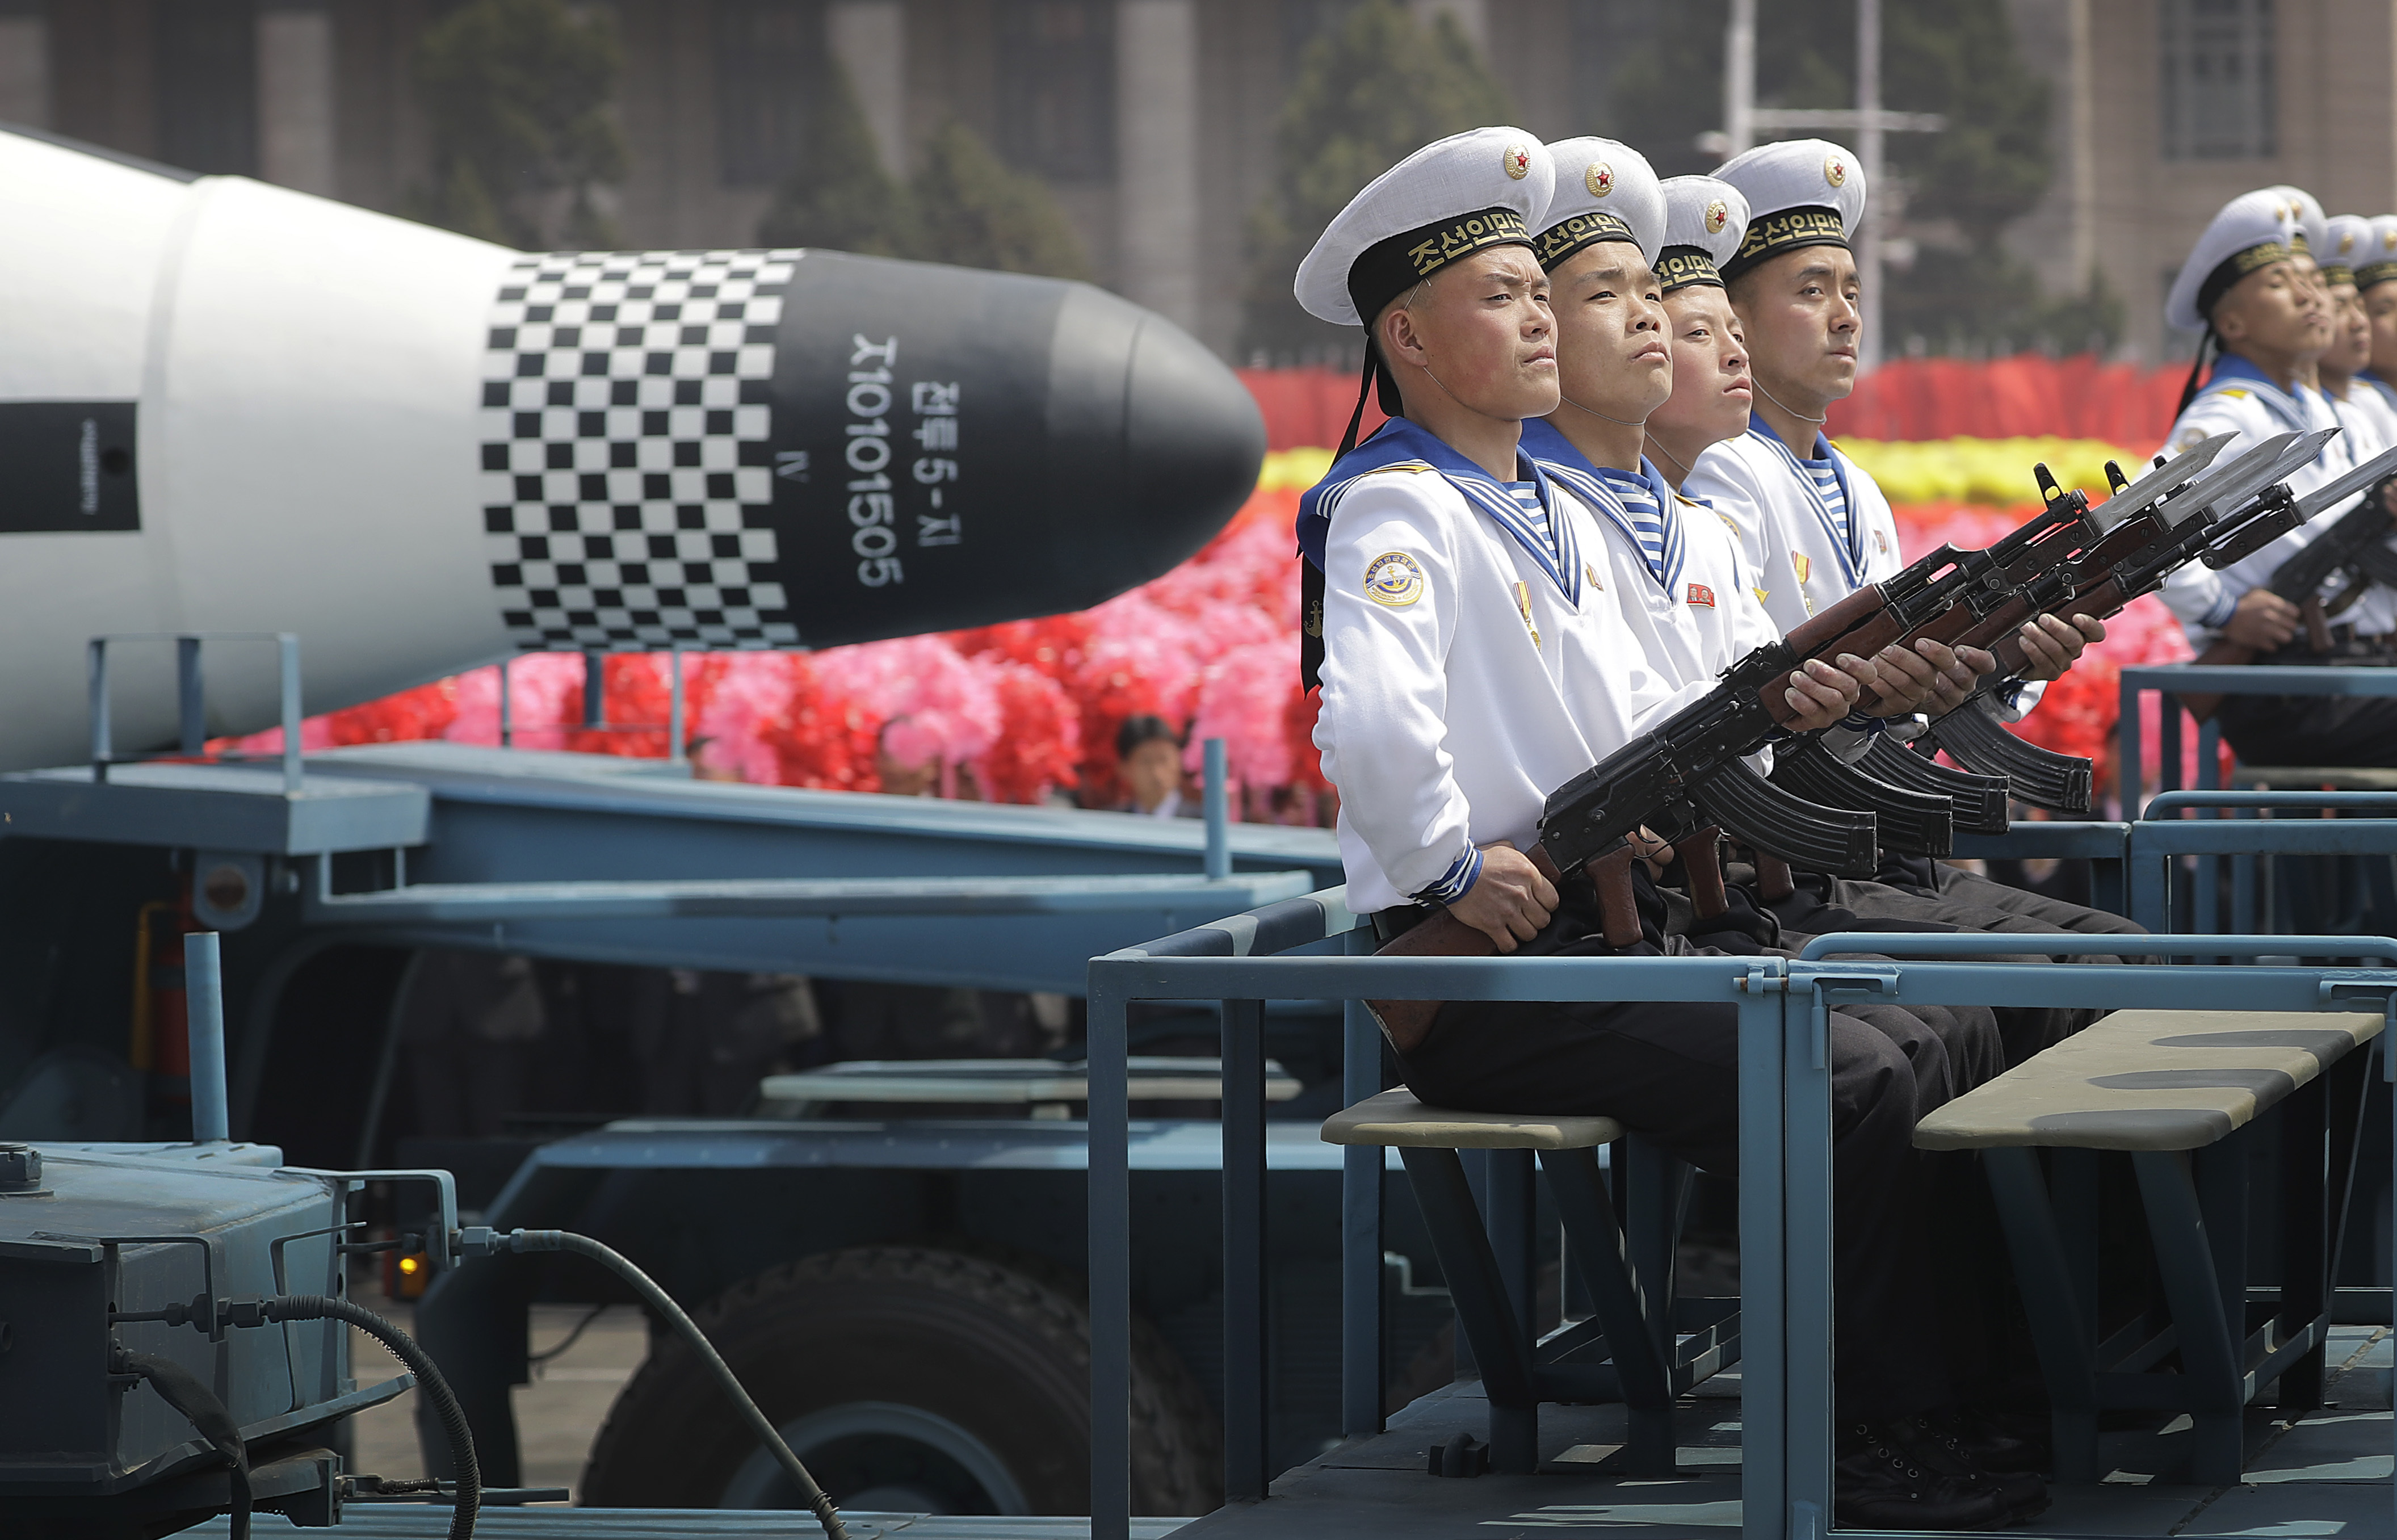 Navy personnel sit in front of a submarine-launched ballistic missile (SLBM) during a military parade on Saturday, April 15, 2017, in Pyongyang, North Korea to celebrate the 105th birth anniversary of Kim Il Sung, the country's late founder and grandfather of current ruler Kim Jong Un. (AP Photo/Wong Maye-E)